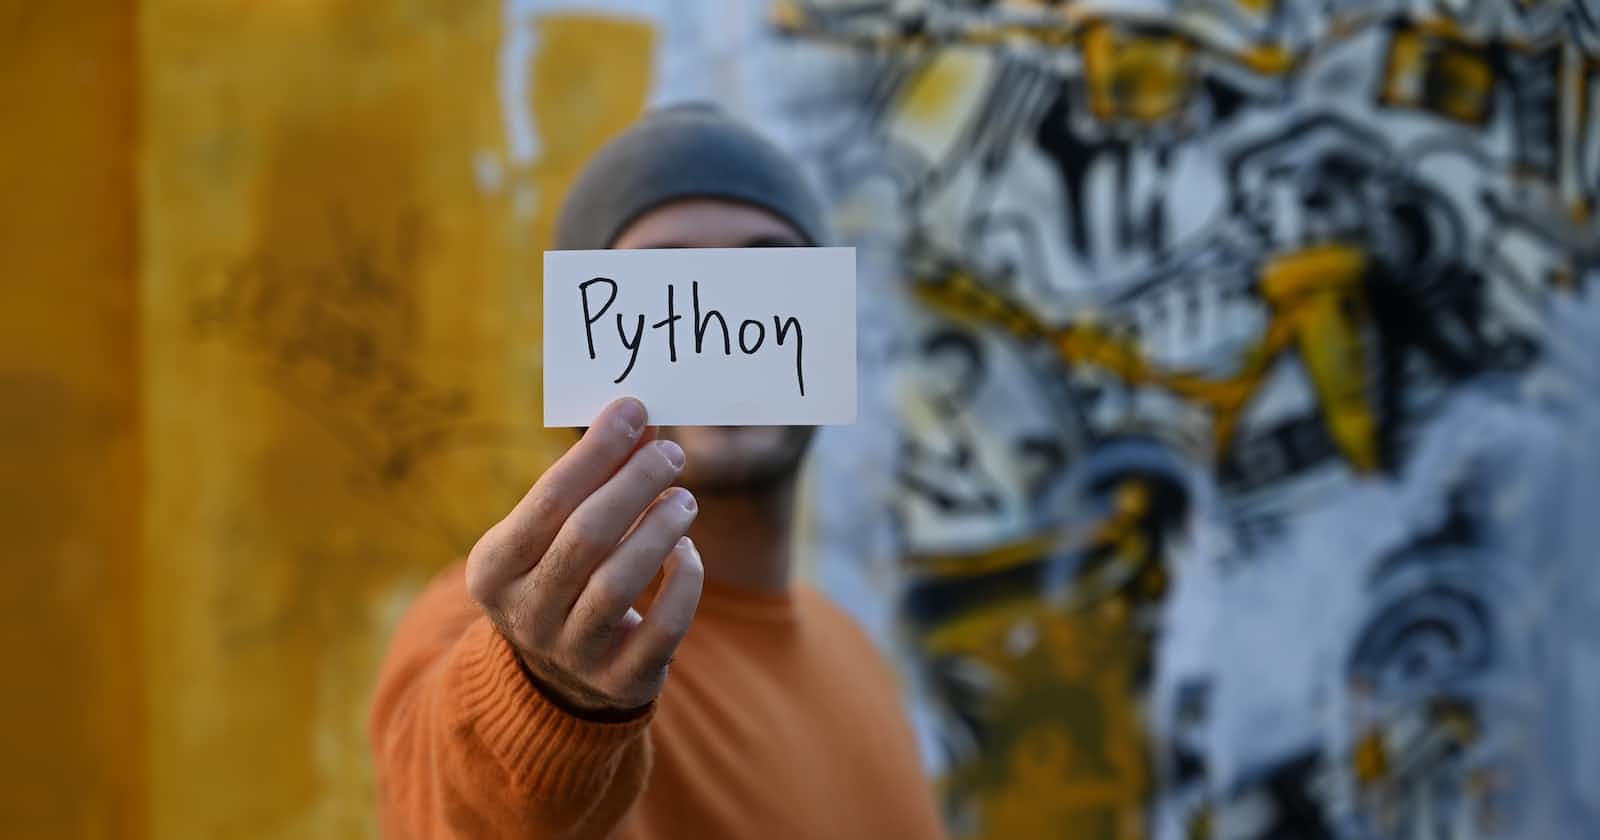 Five Notable Use Cases Well-Suited For Python